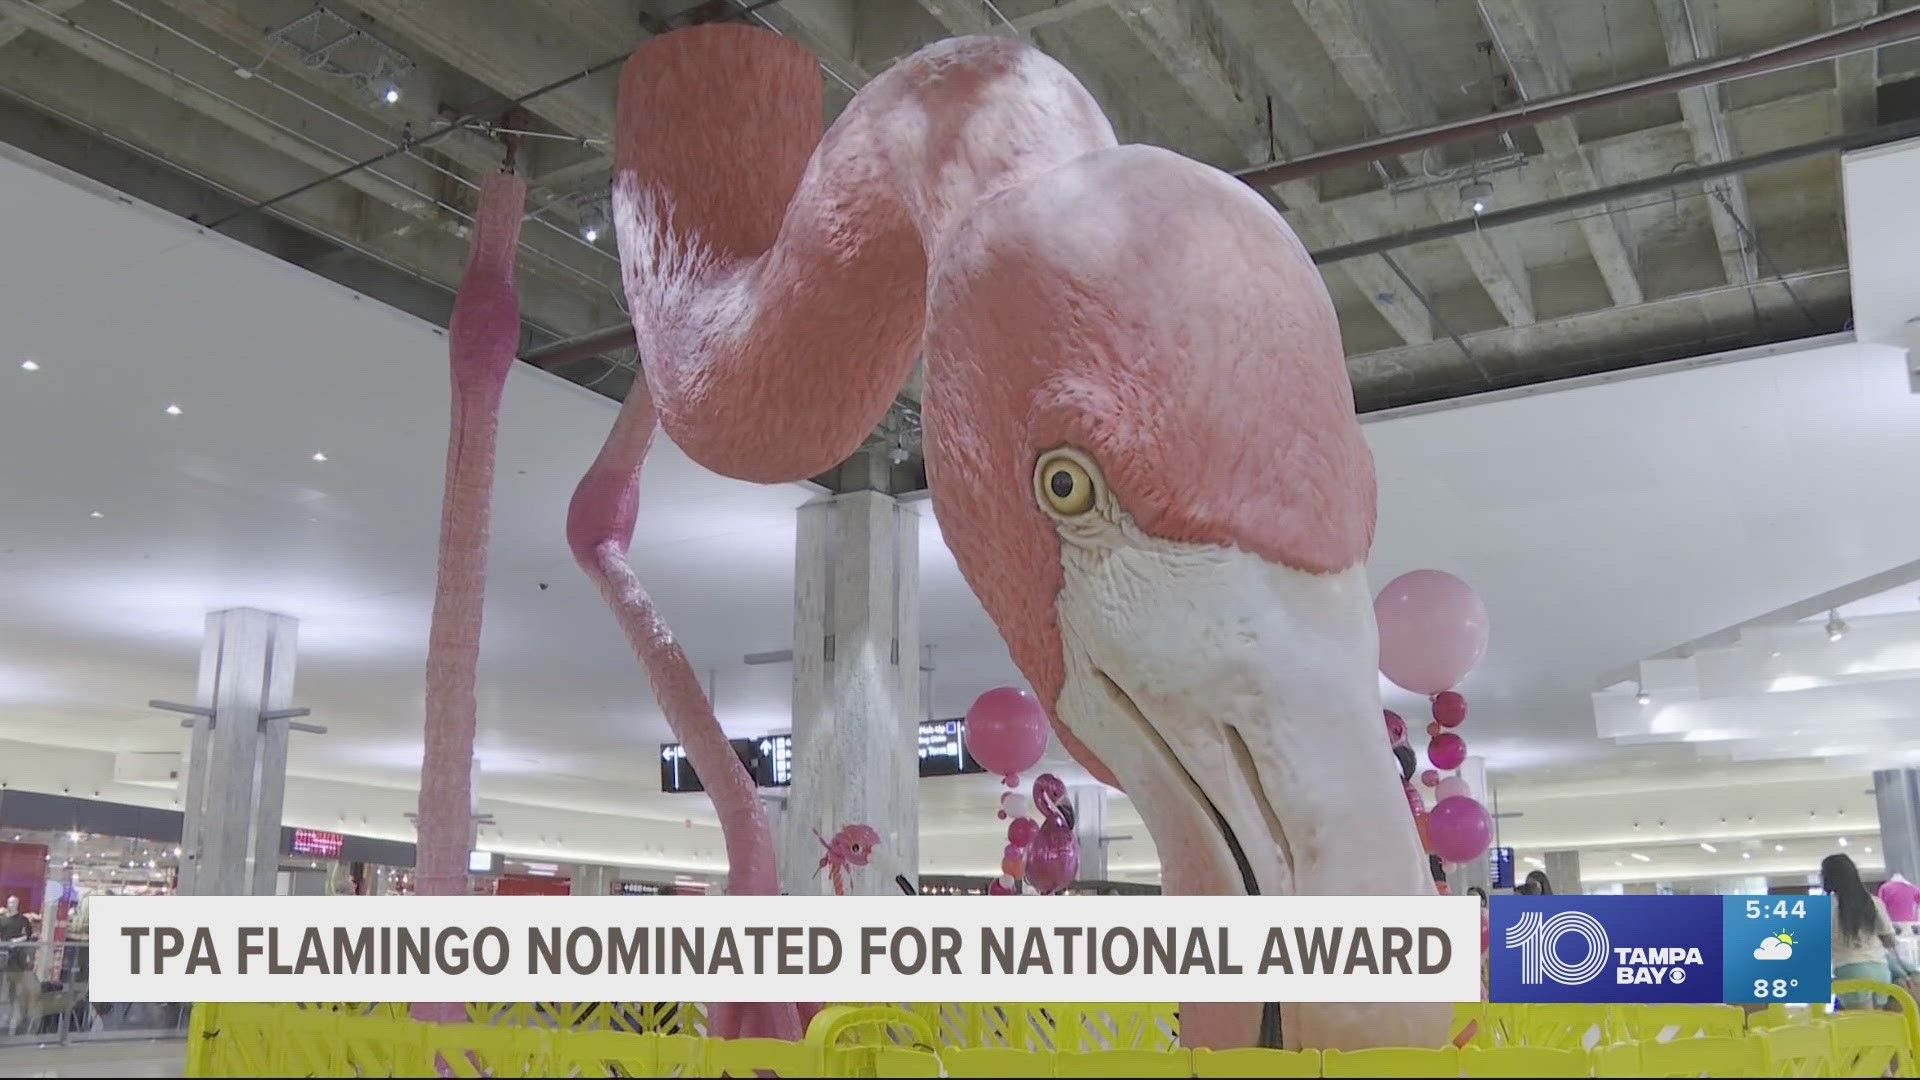 The big pink bird, named Phoebe, was announced as one of the contestants in the 2023 CODAwawards Top 100 list.